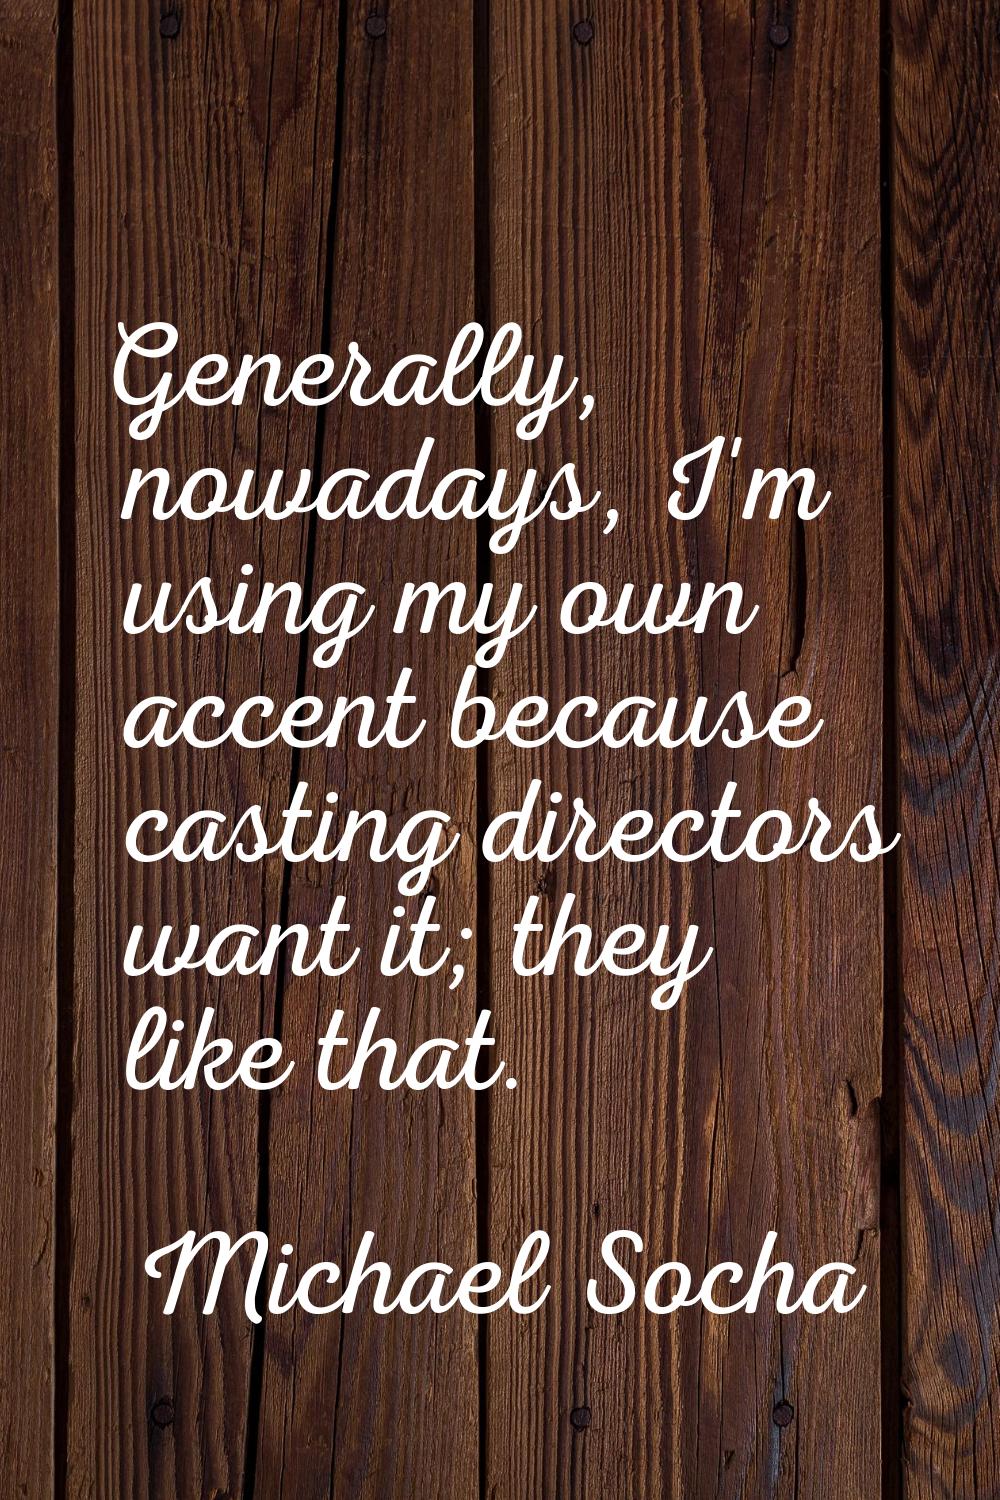 Generally, nowadays, I'm using my own accent because casting directors want it; they like that.